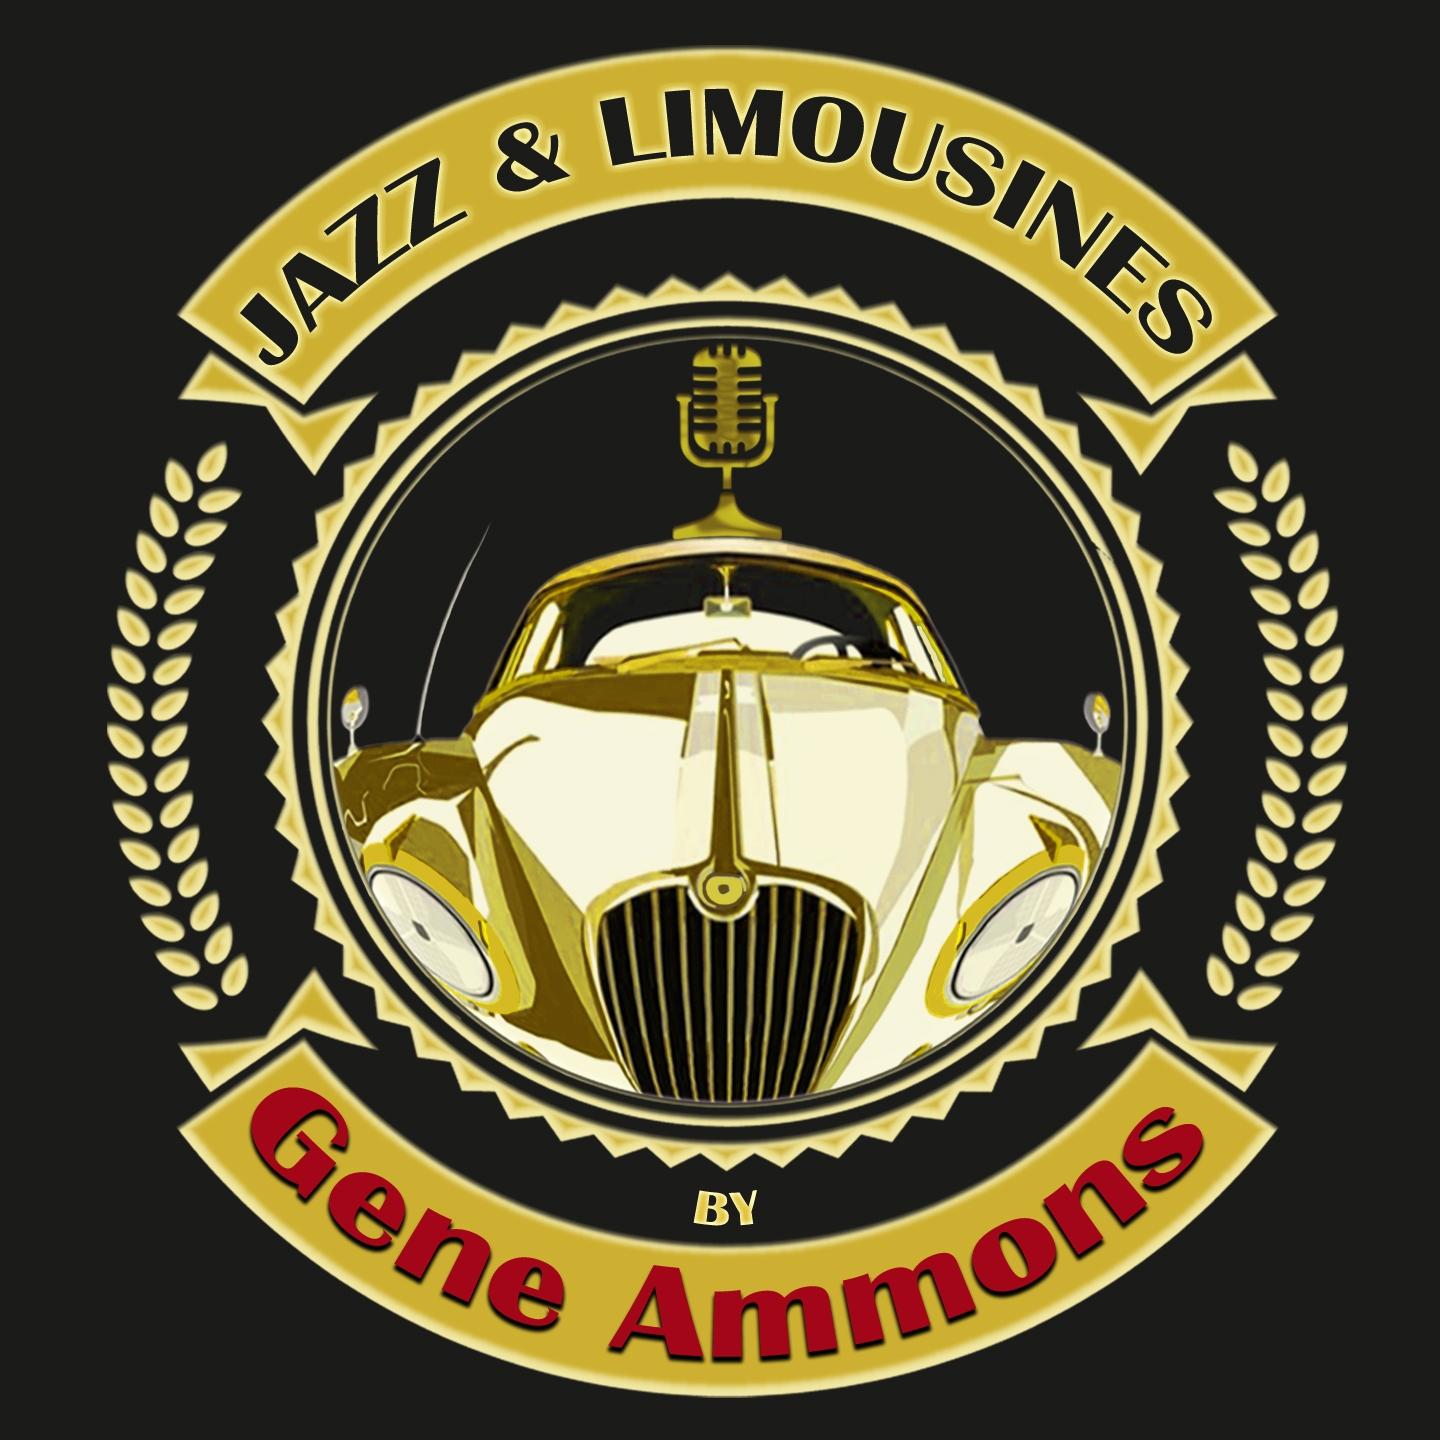 Jazz & Limousines by Gene Ammons